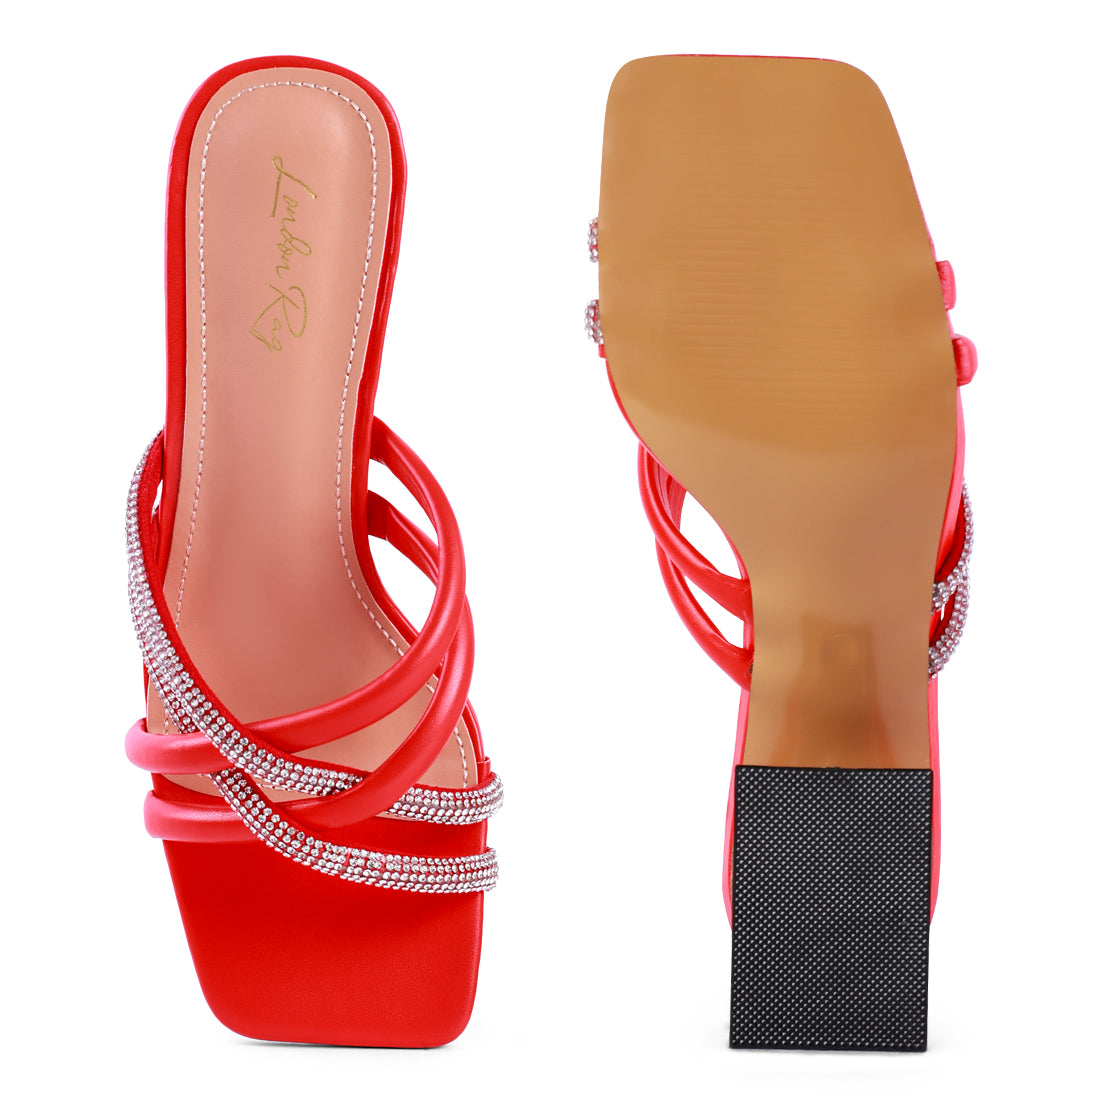 Red Cut Out Heel Diamante Sandals